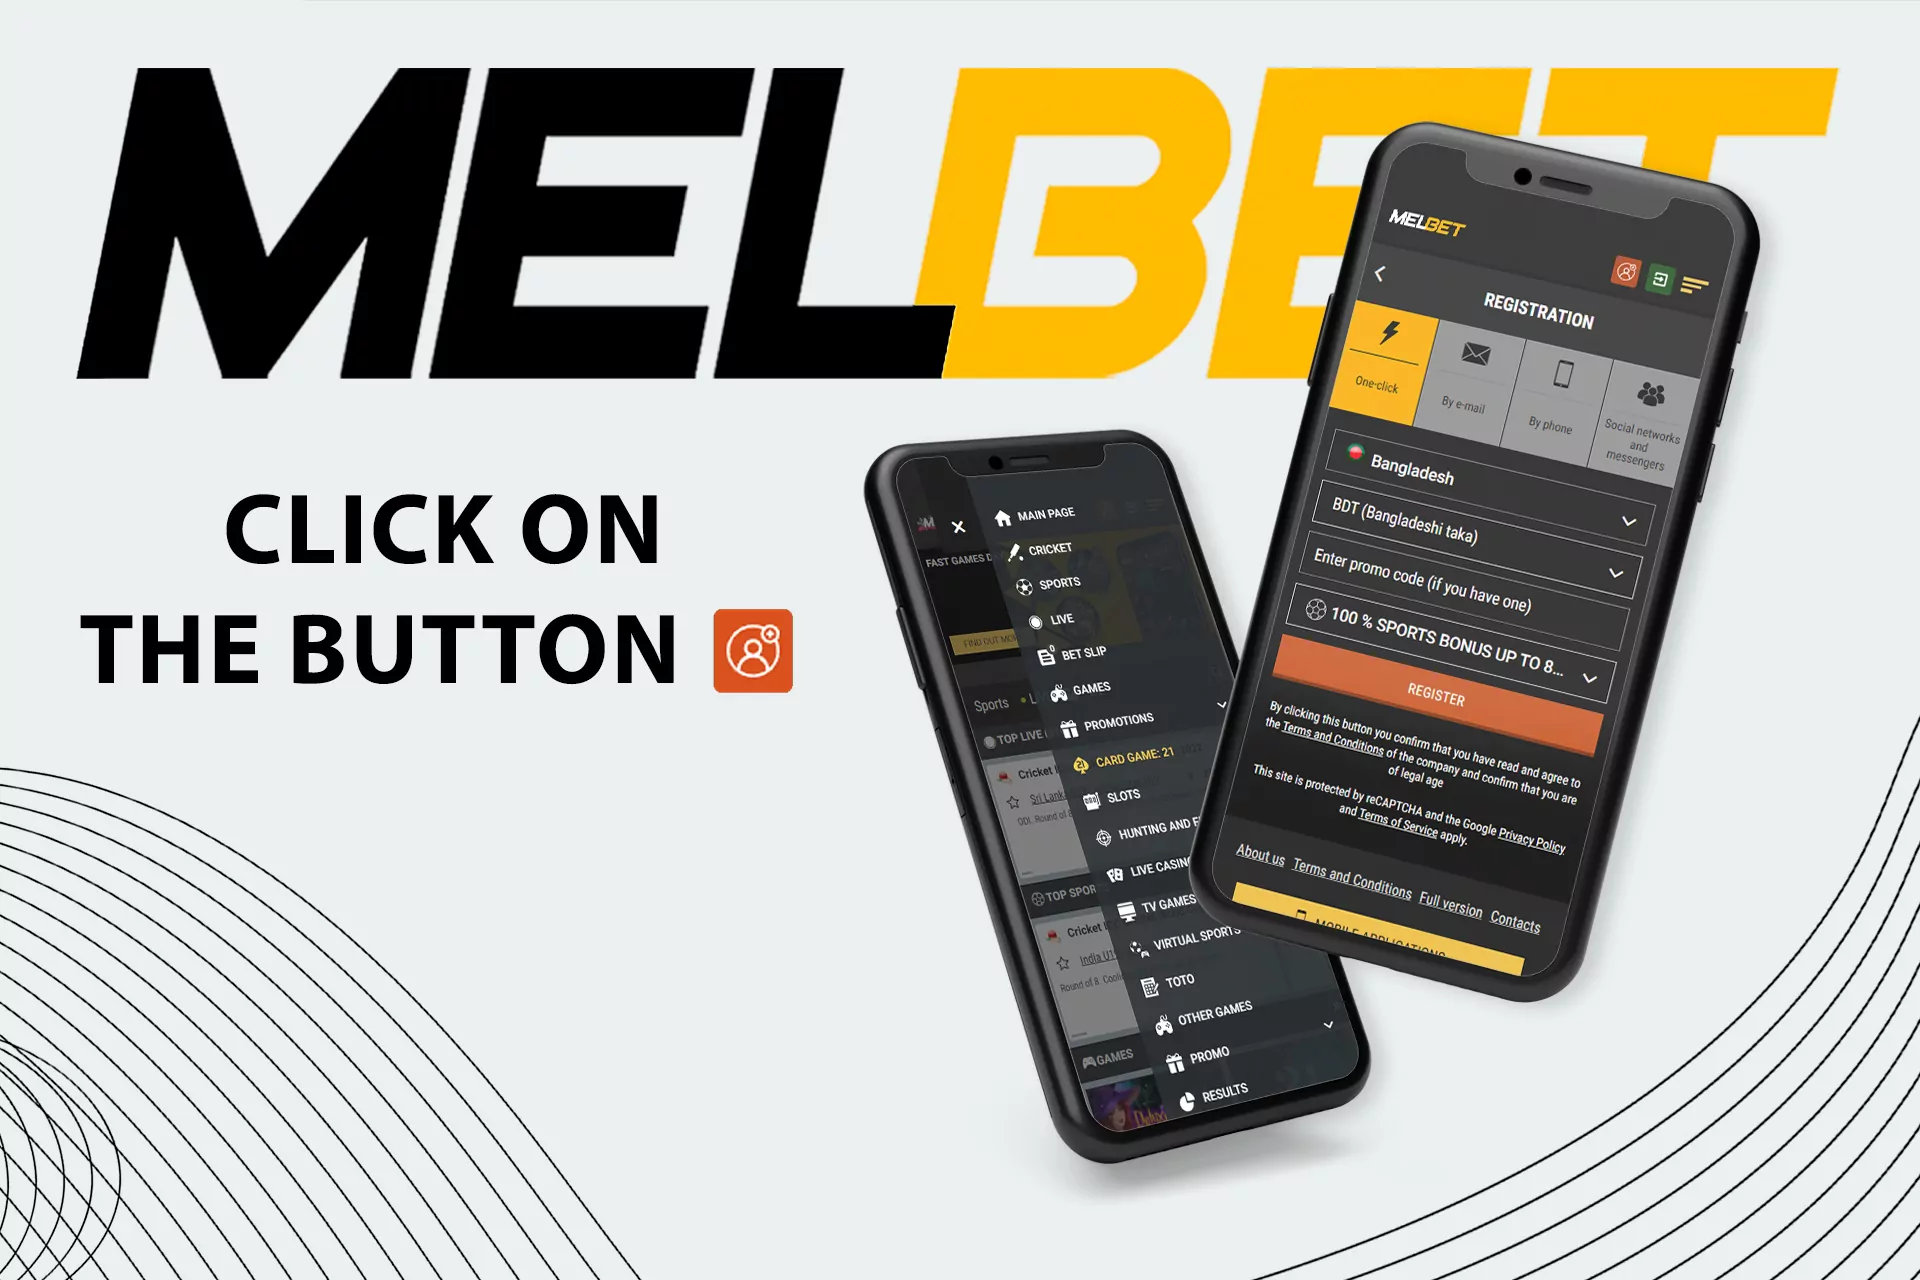 Click on the registration button to create a Melbet account.